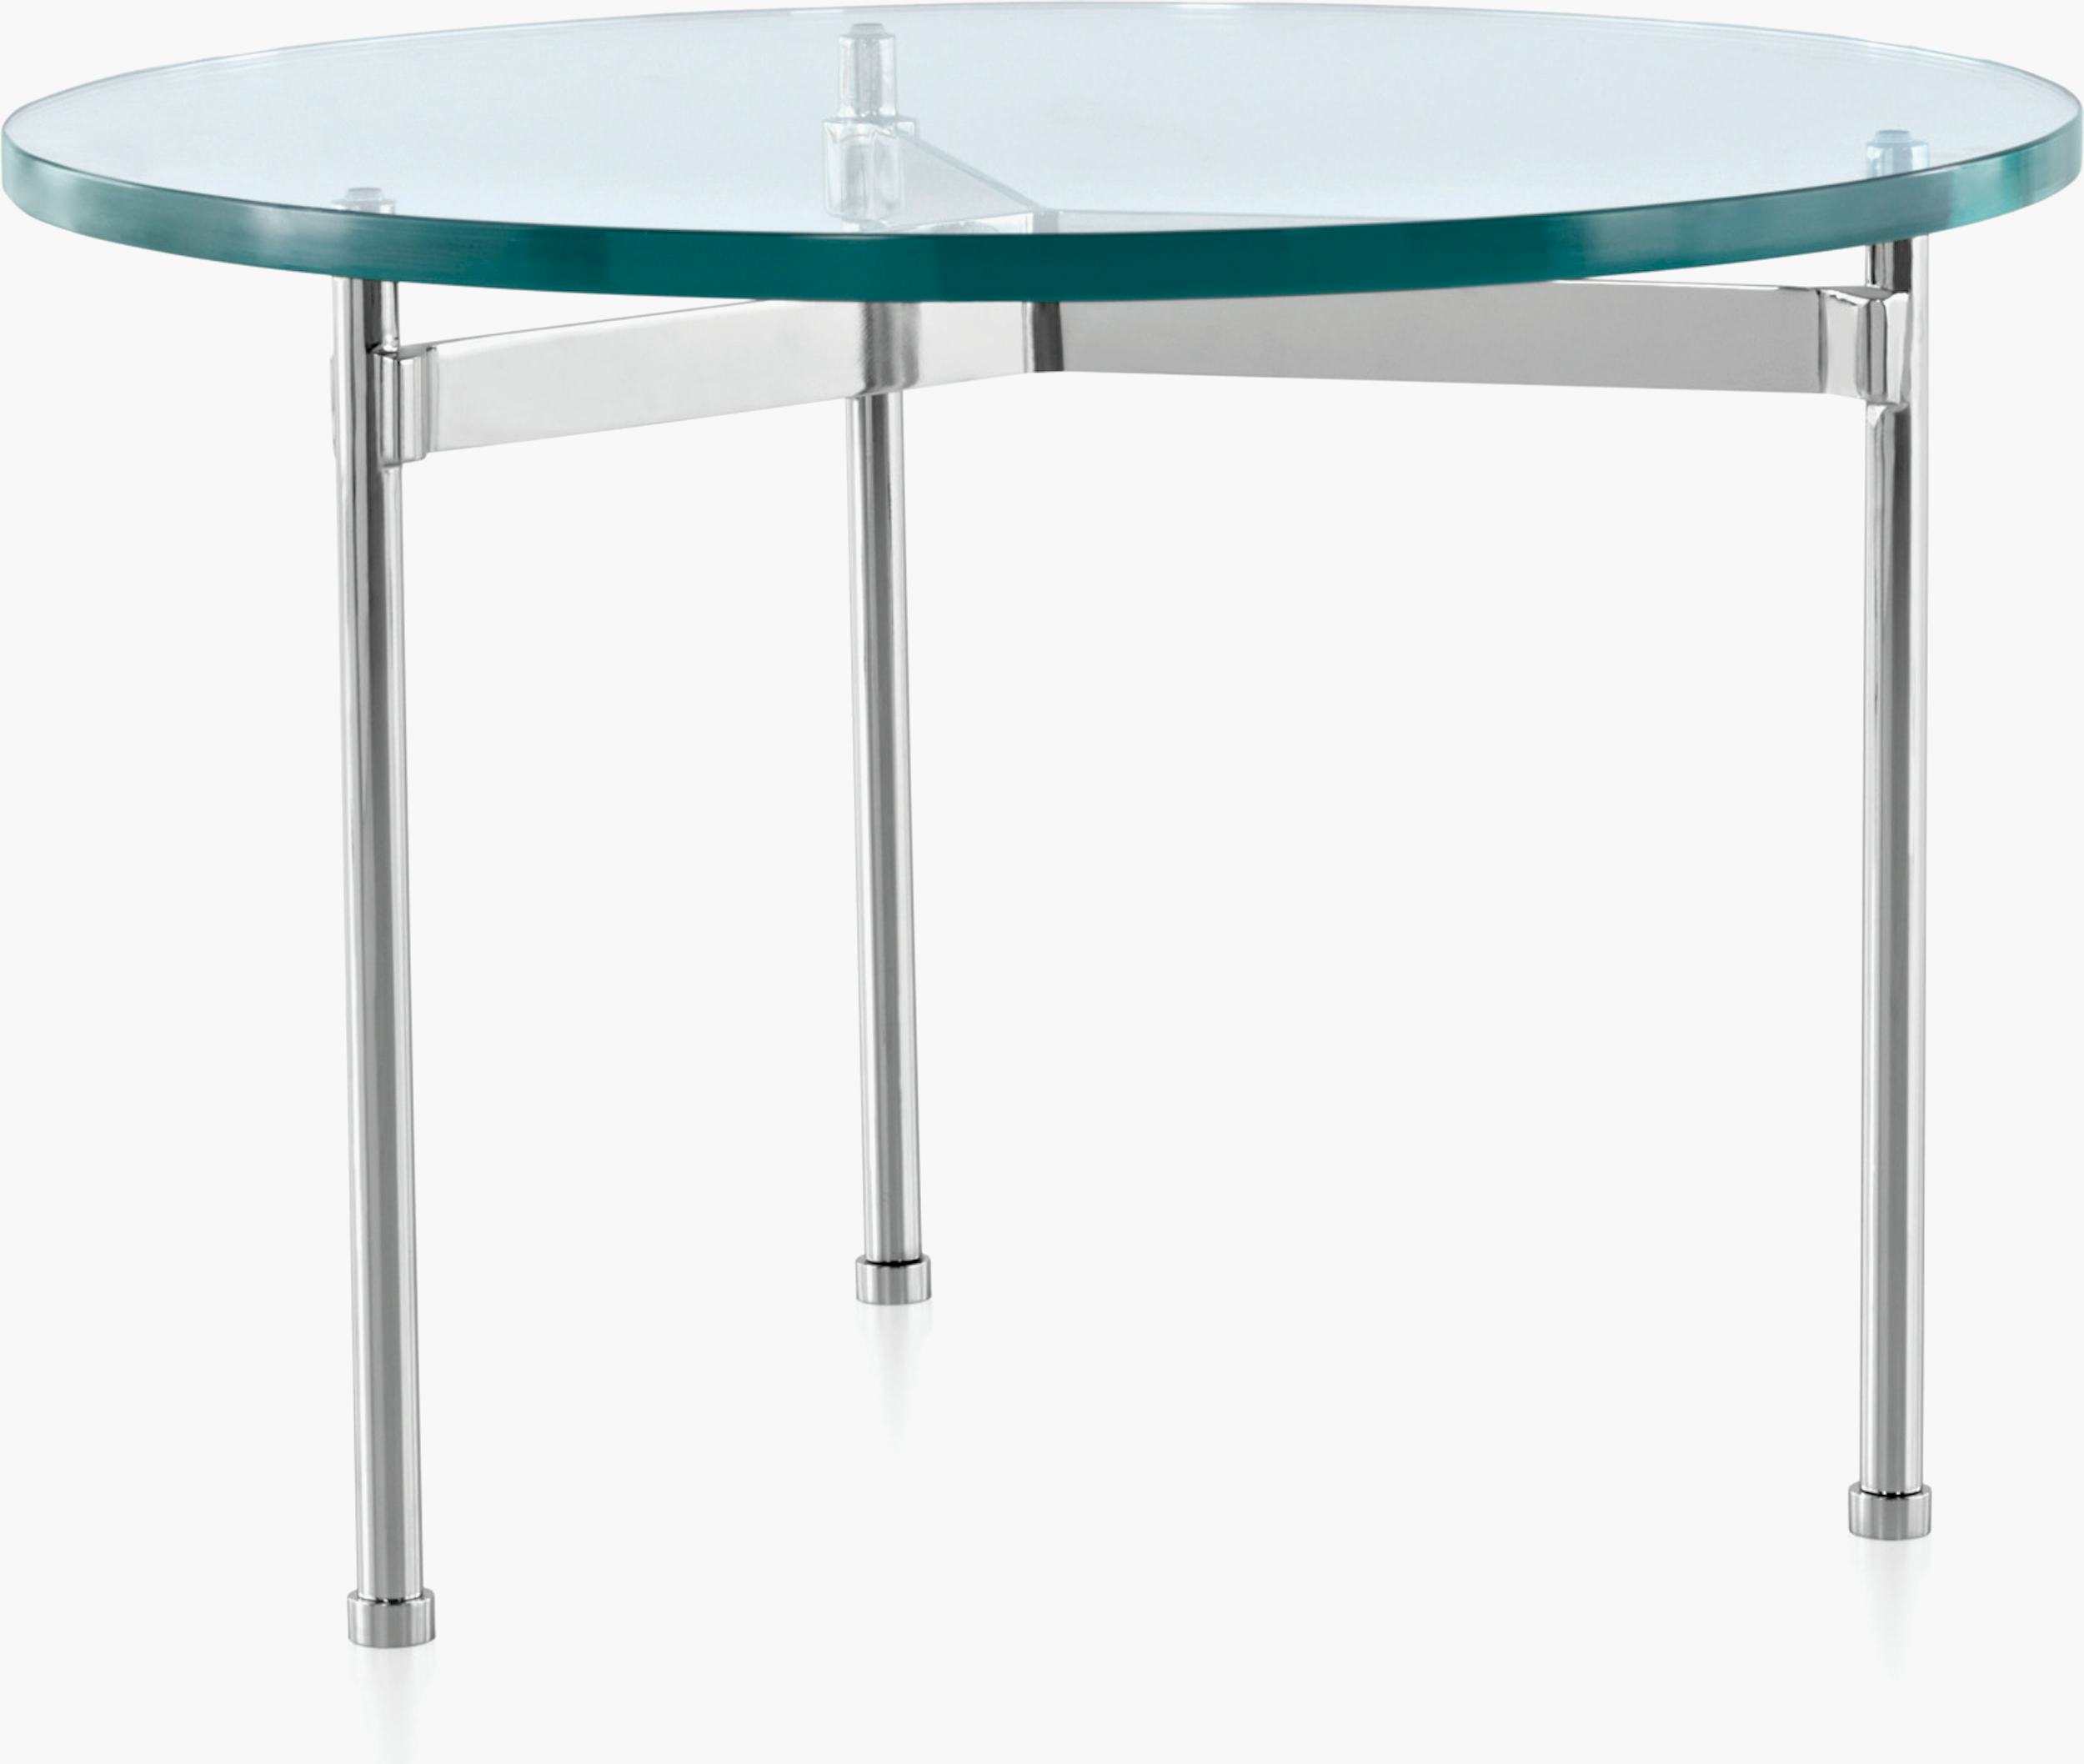 Design Table Within Reach – Claw